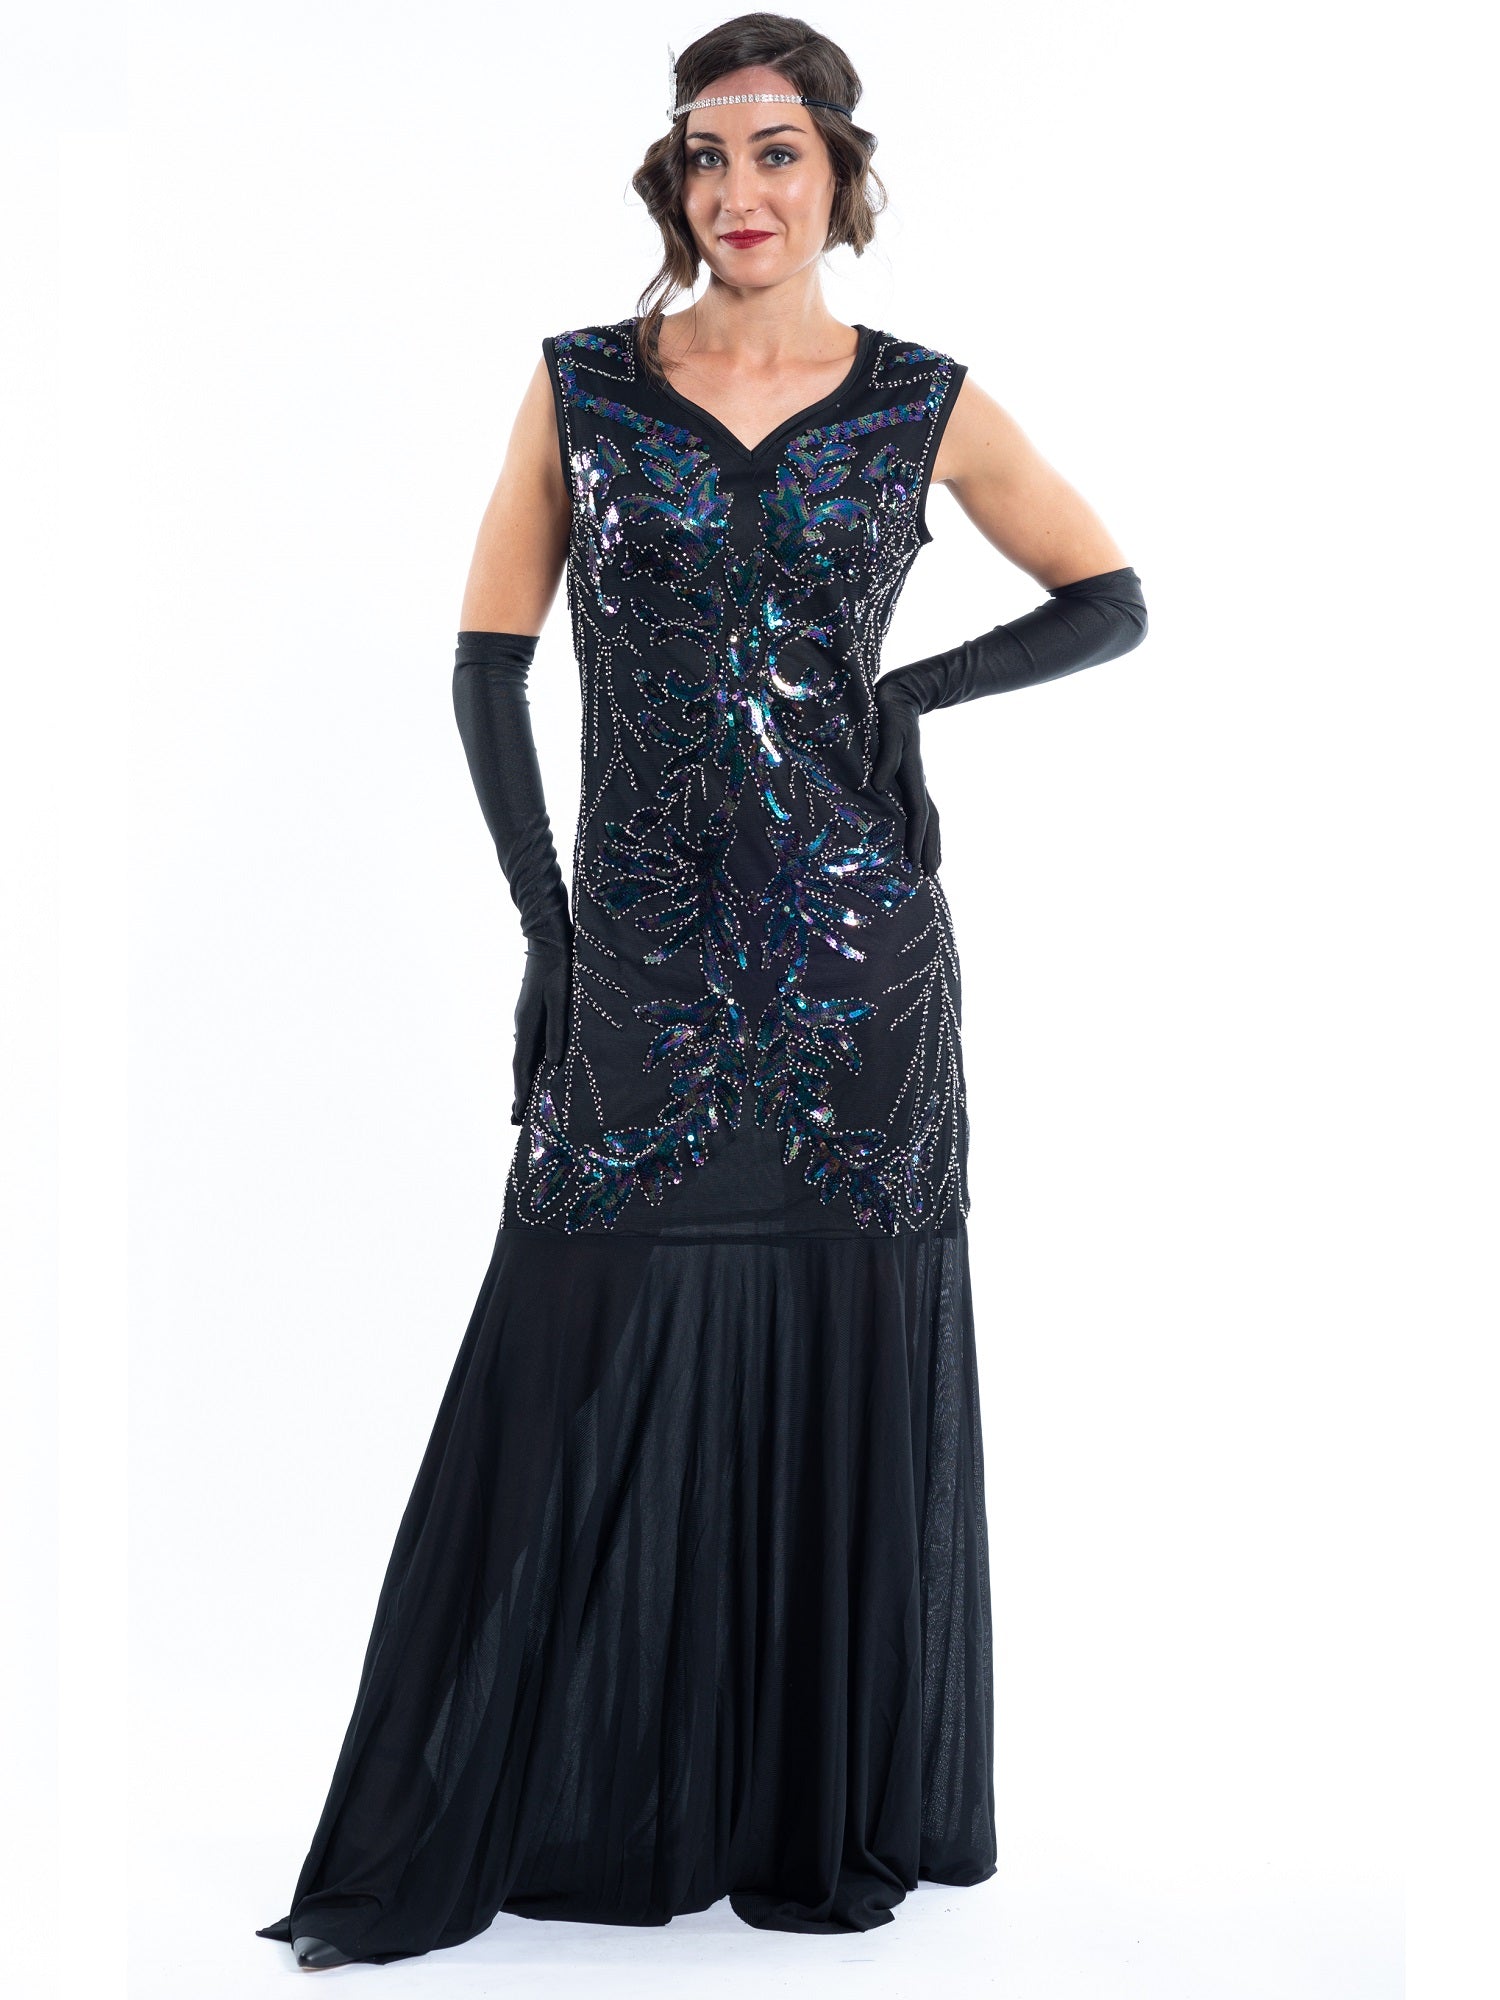 Long Black Great Gatsby Dress with sequins and beads